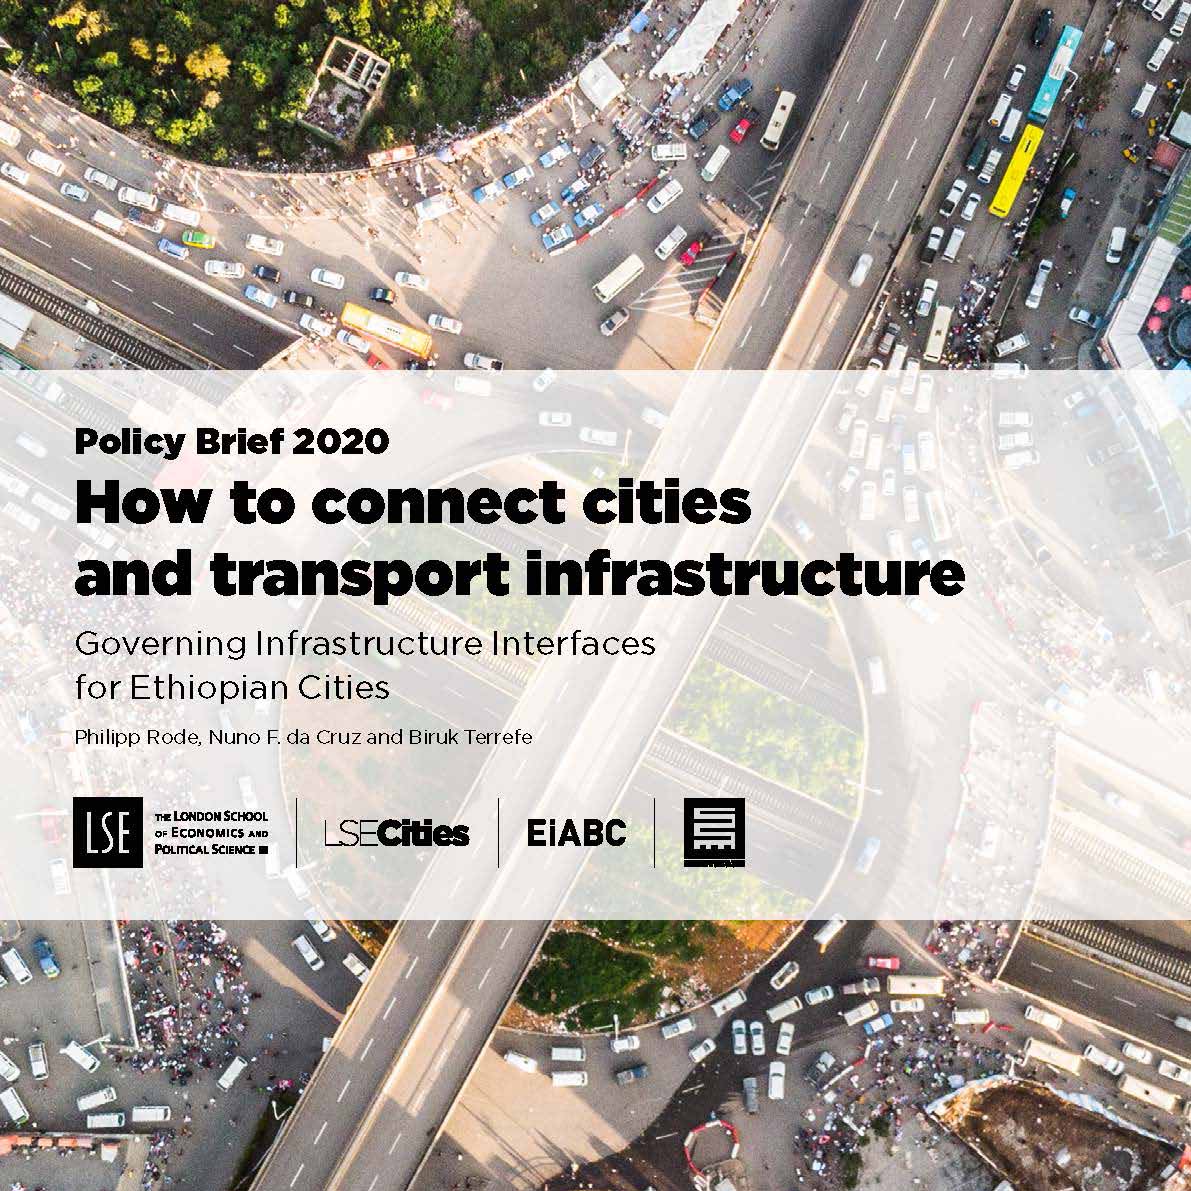 Policy-Brief-2020-How-to-connect-cities-and-transport-infrastructure-600x600